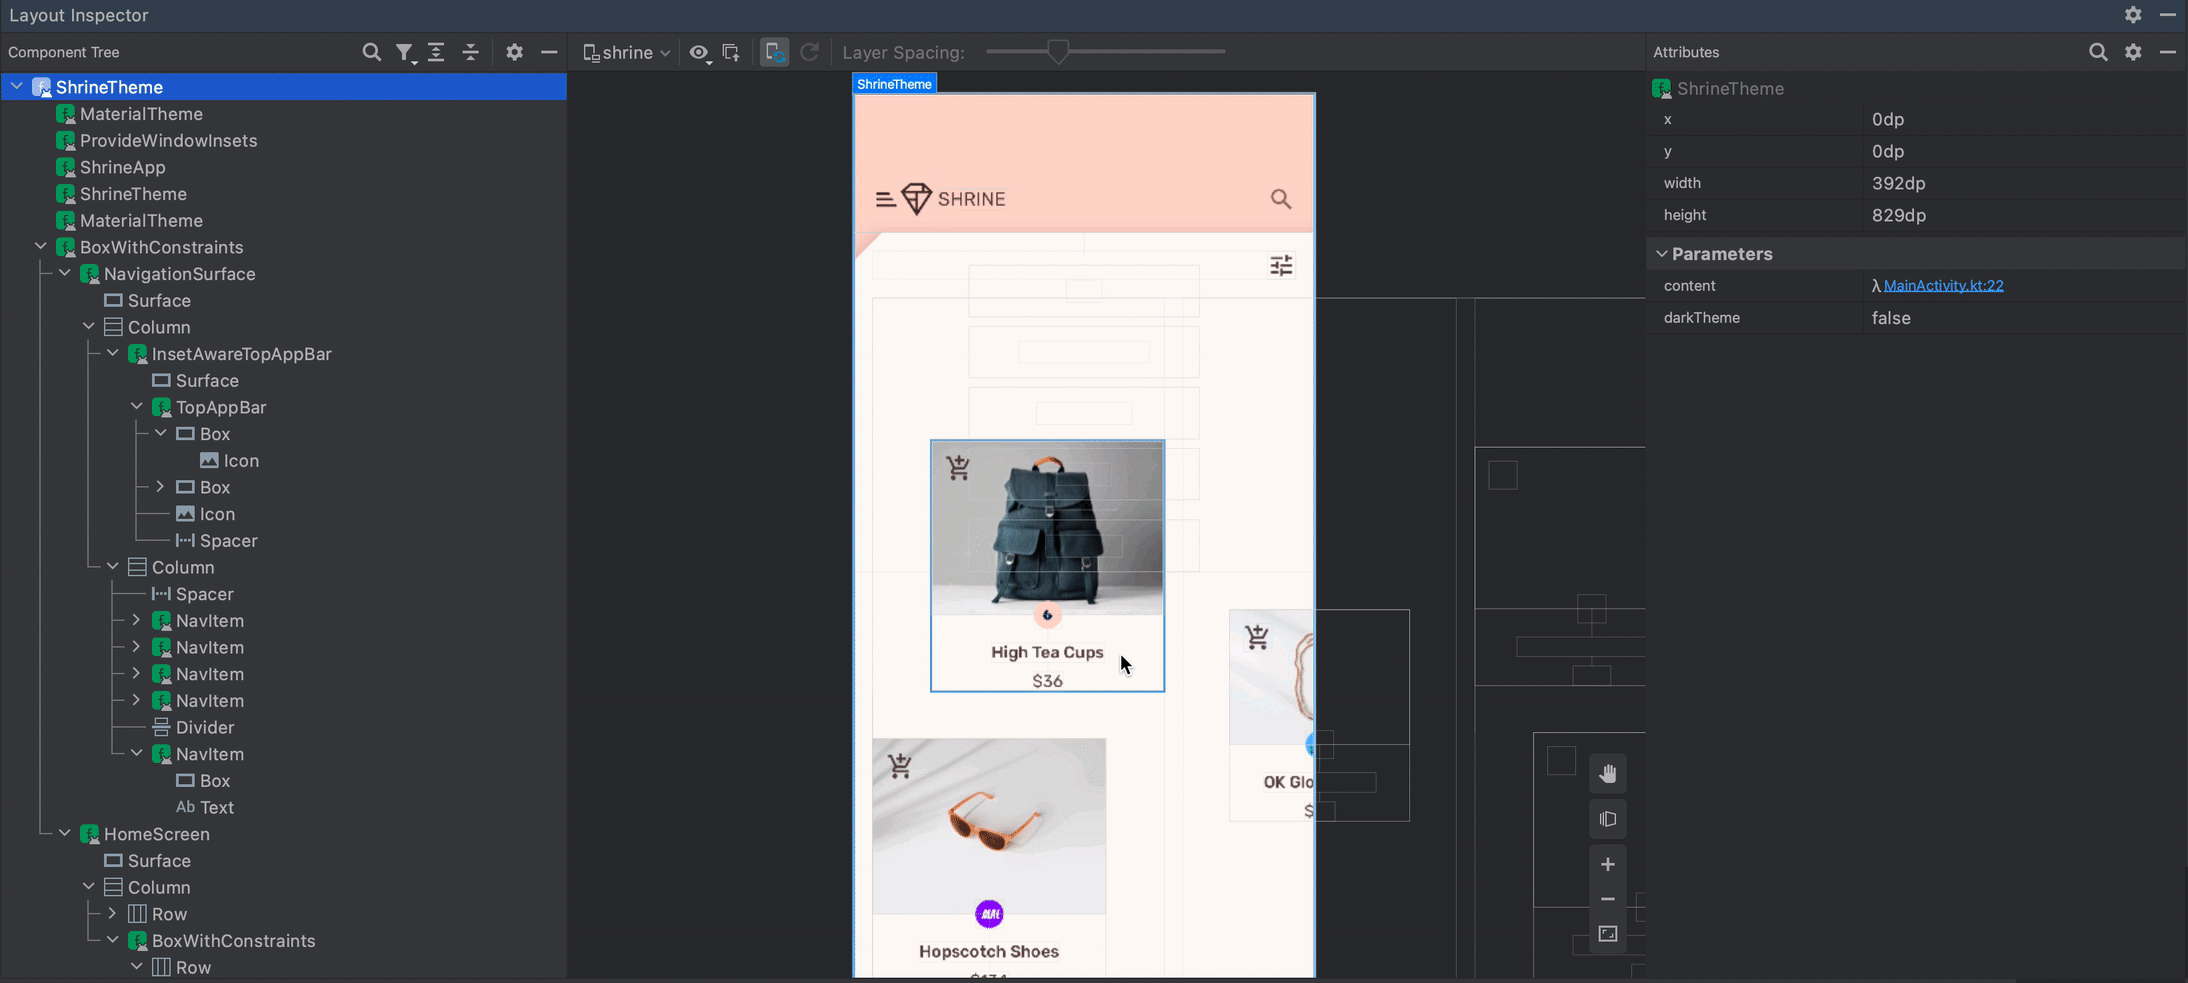 △ Compose Layout Inspector